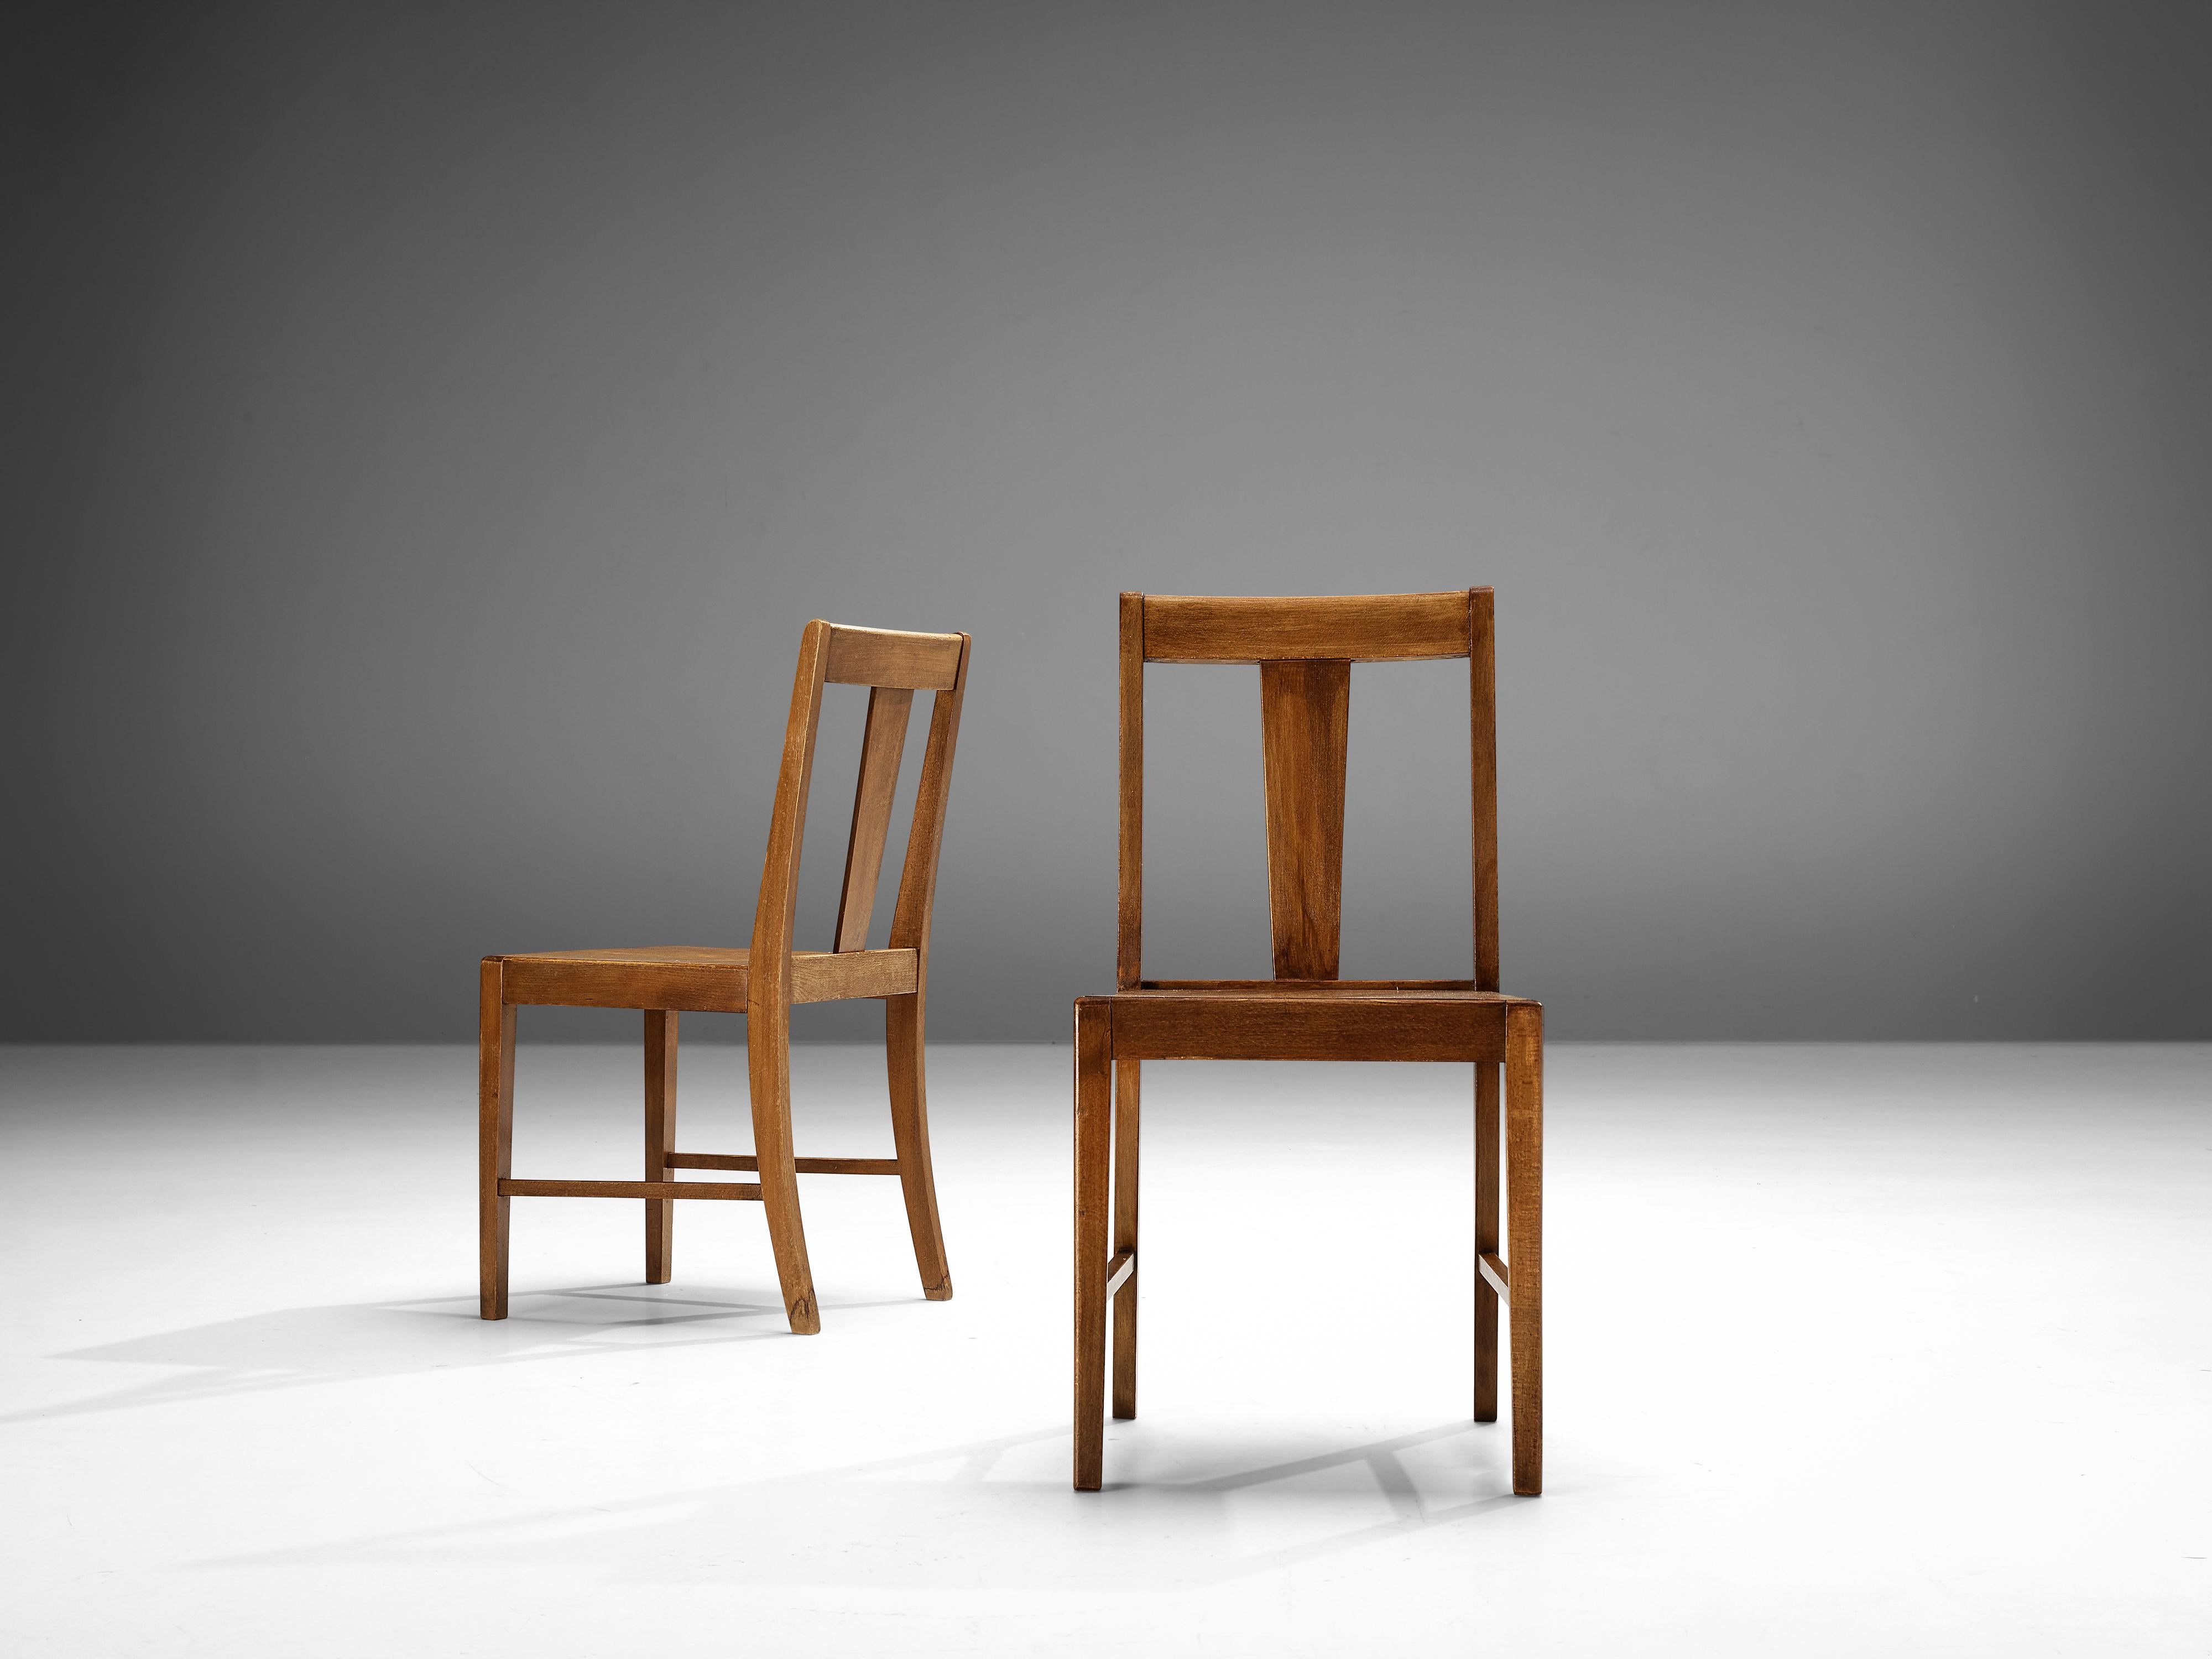 Dining chairs, stained beech, The Netherlands, 1940s

This pair of dining chairs not only shows a well-balanced backrest and overall frame. The frame is very structured and sturdy which is also visible in the legs. Thanks to the backrest and legs,